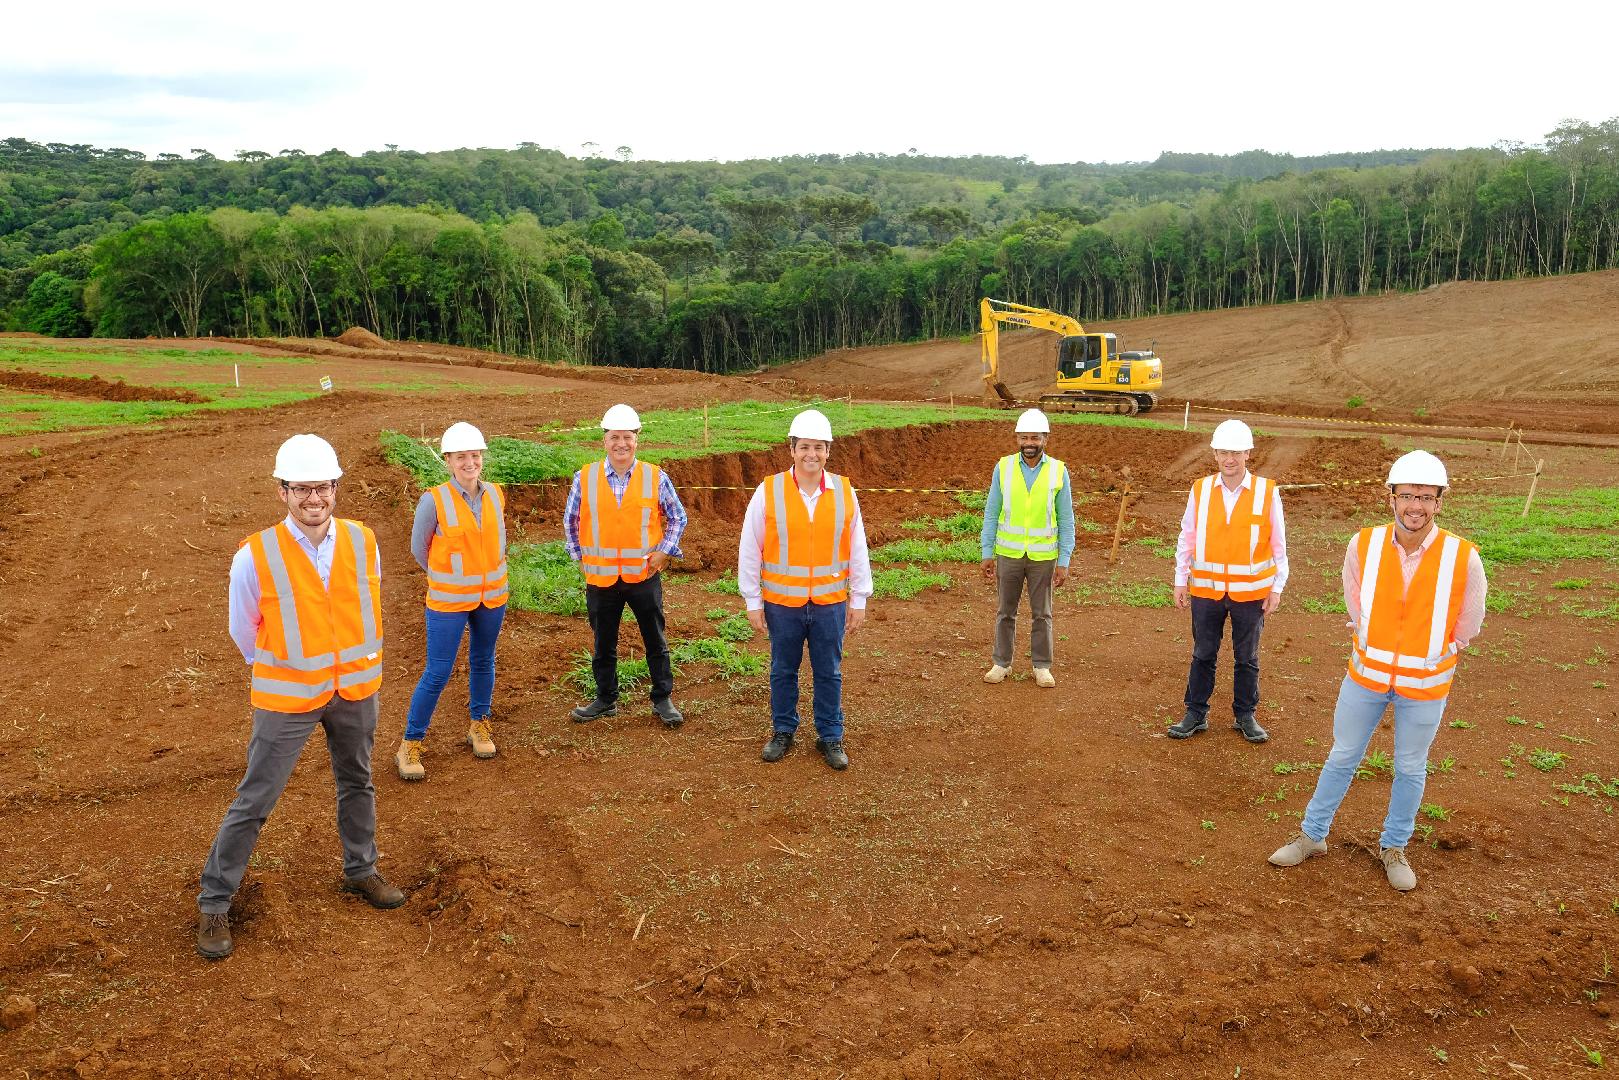 Araucaria: the new Diana Pet Food plant is underway